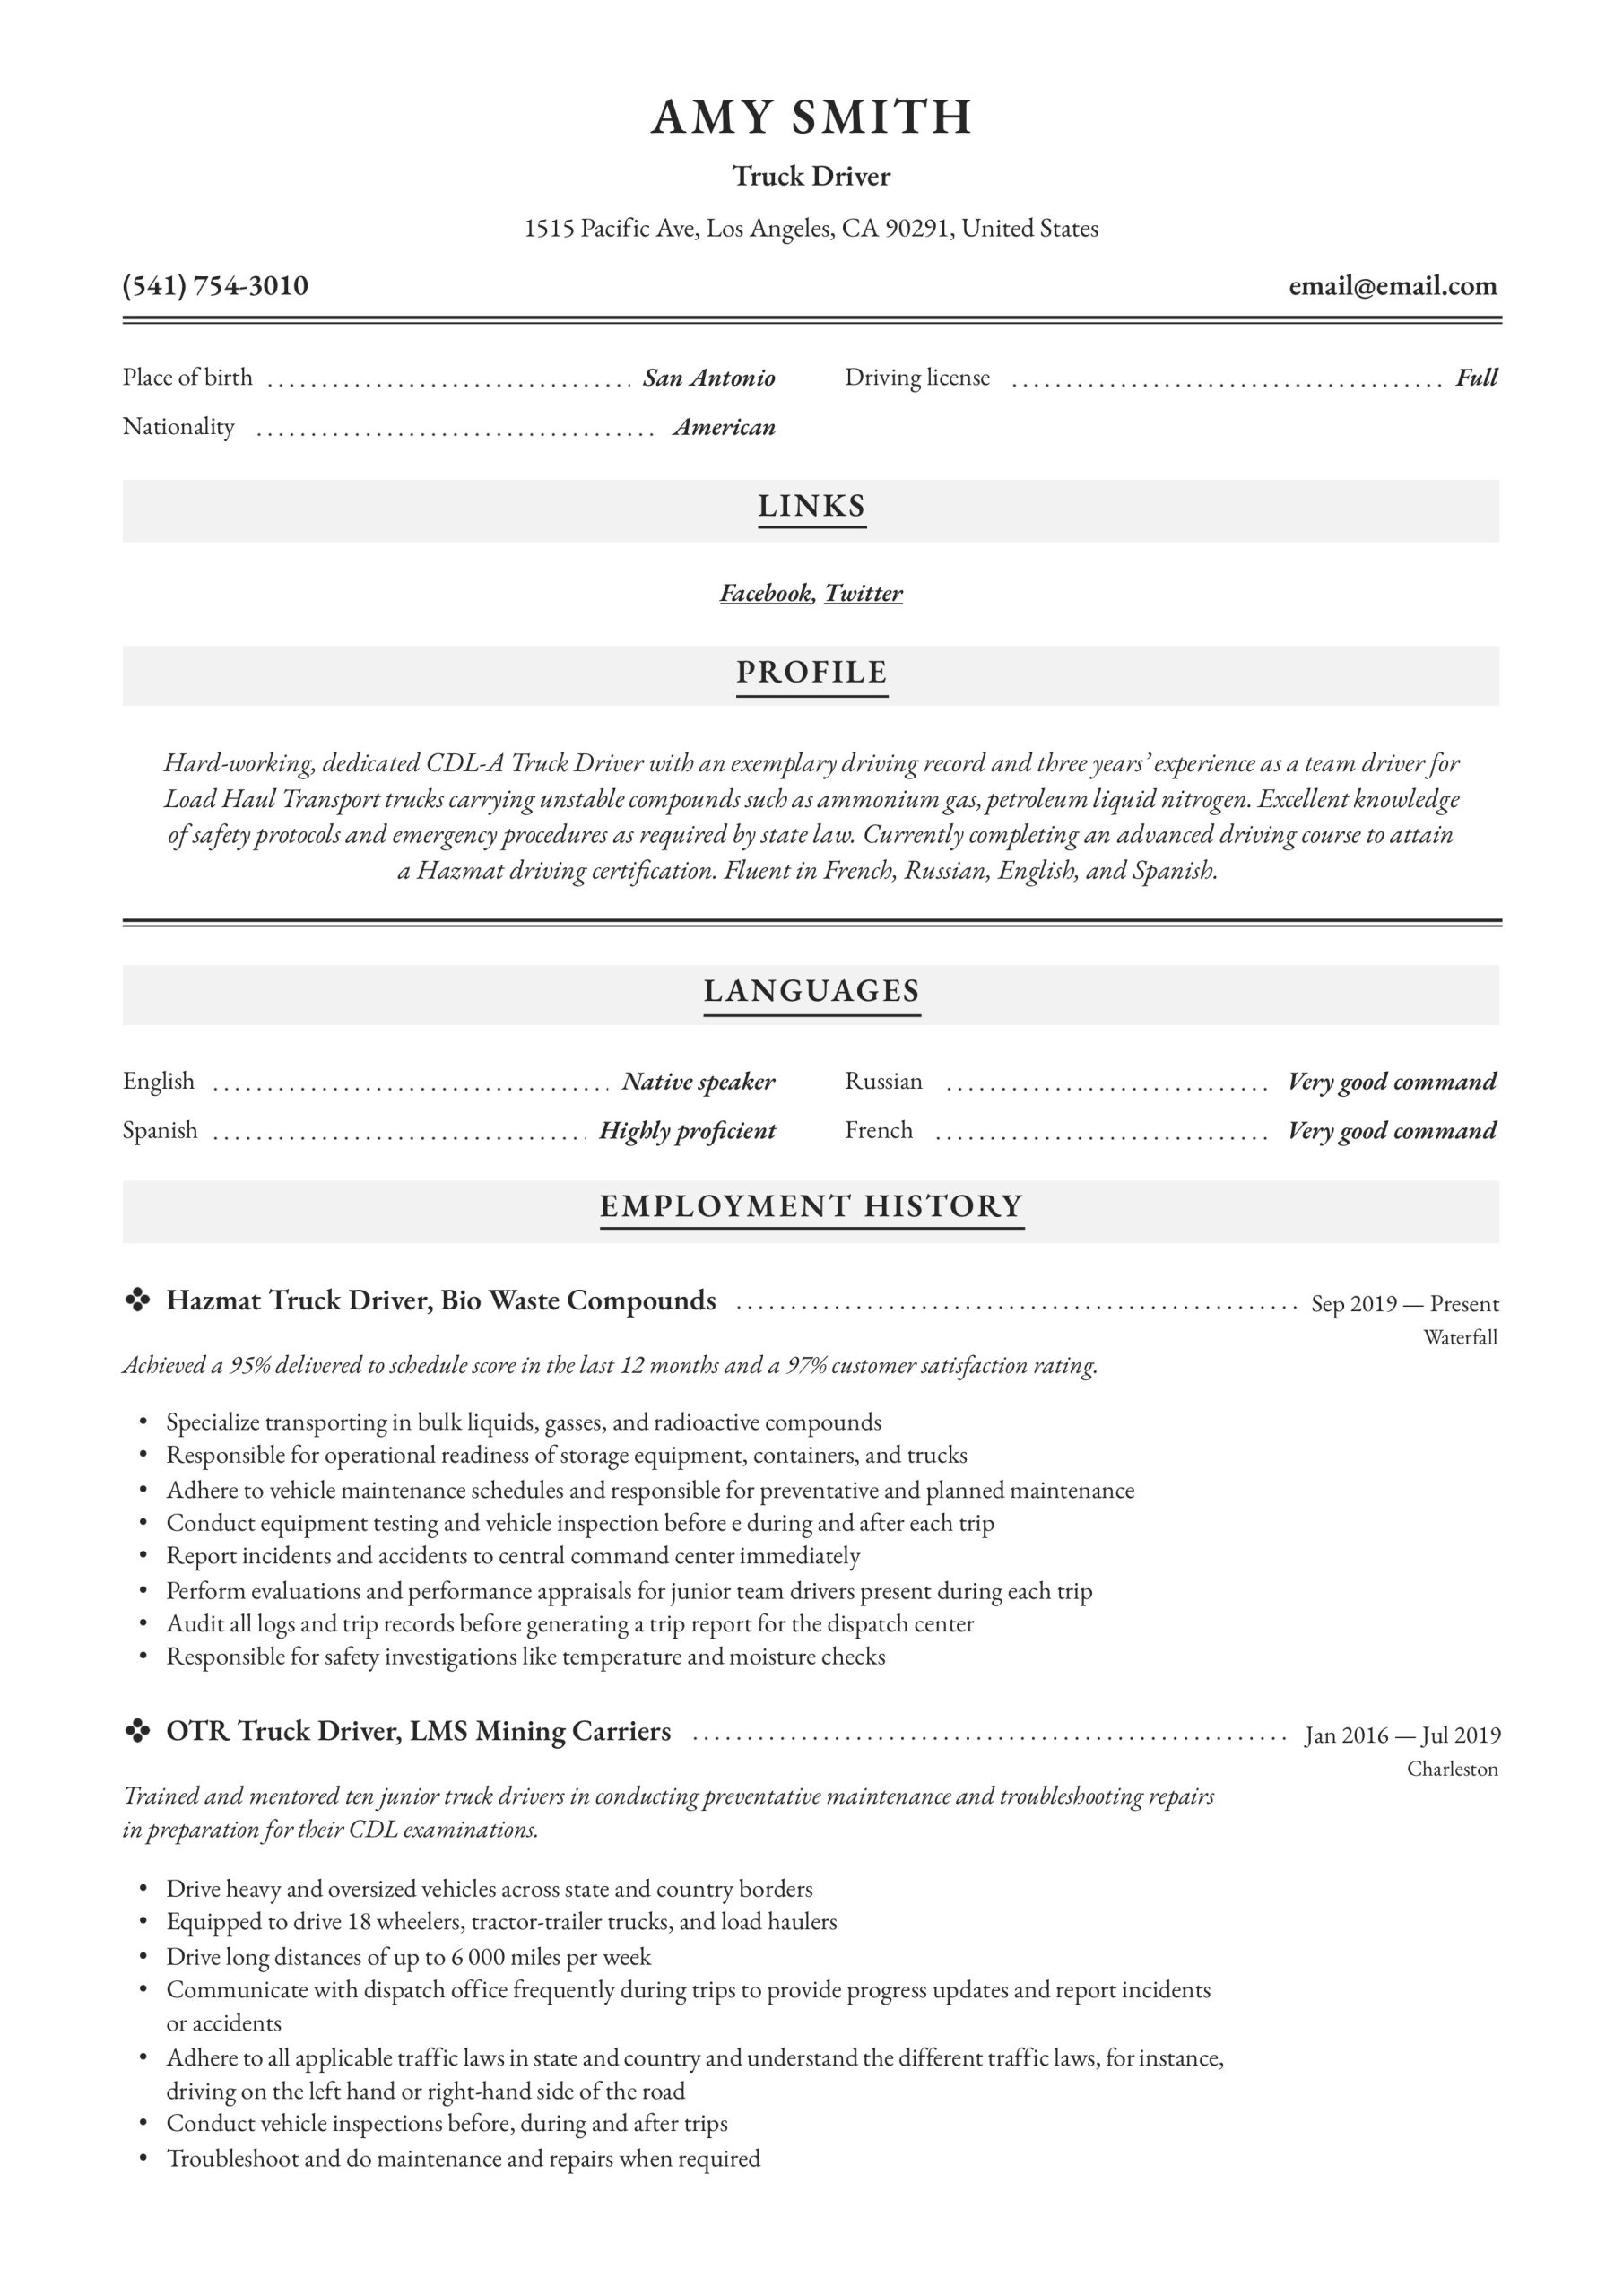 Resume Sample Free New Truck Driver Truck Driver Resume & Writing Guide  12 Resume Examples 2019